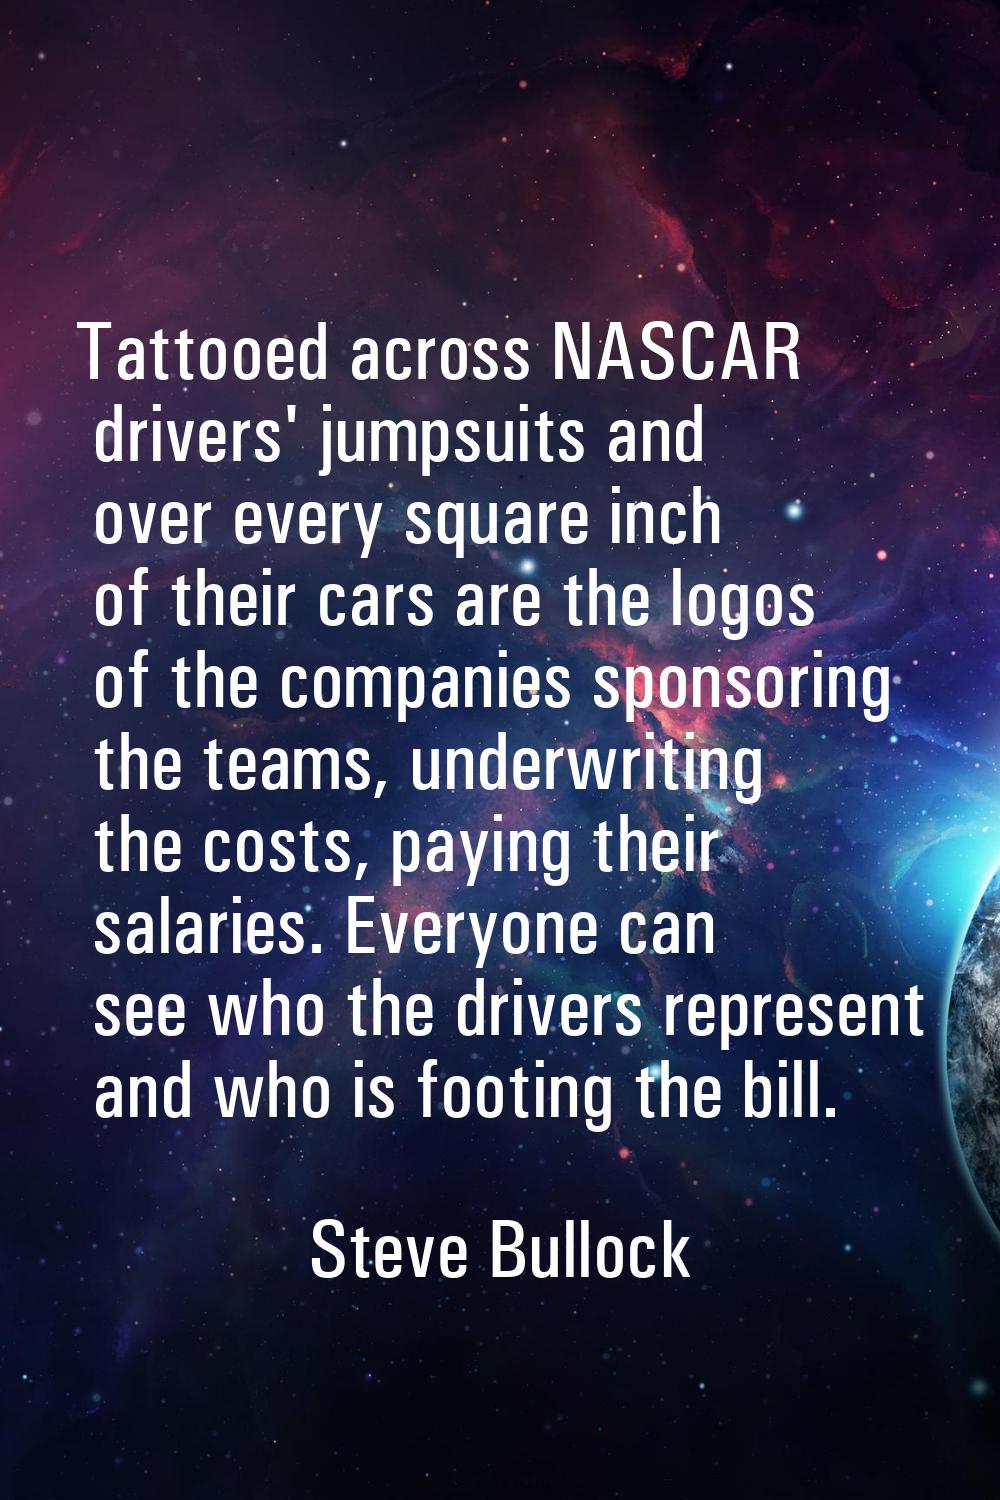 Tattooed across NASCAR drivers' jumpsuits and over every square inch of their cars are the logos of